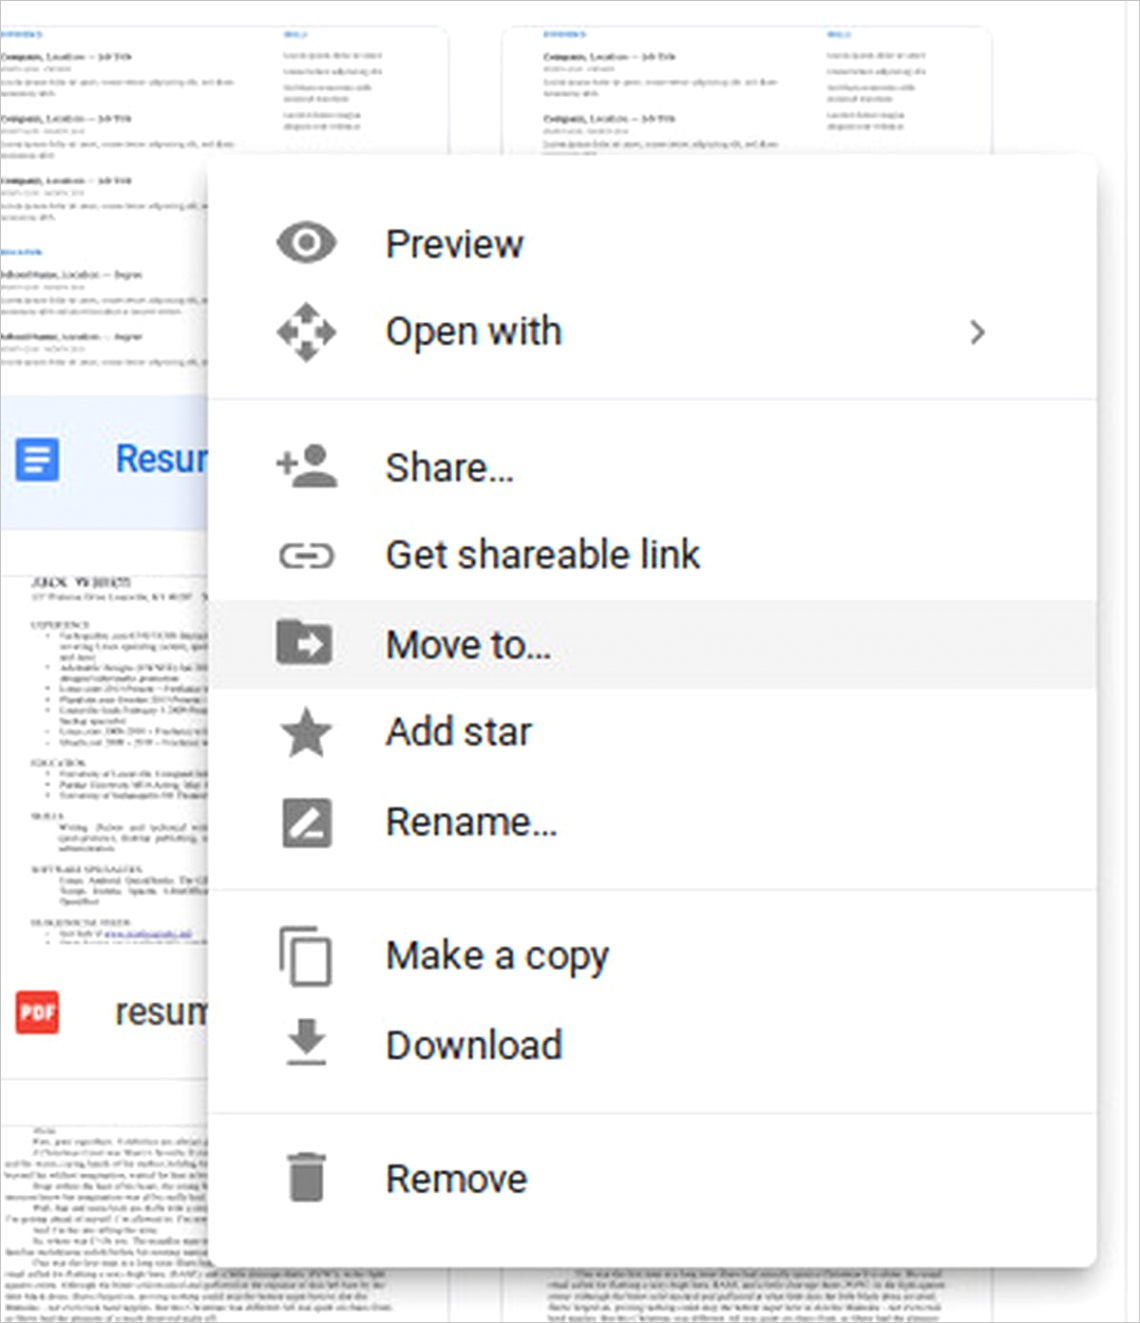 how to create new templates in the free version of google docs